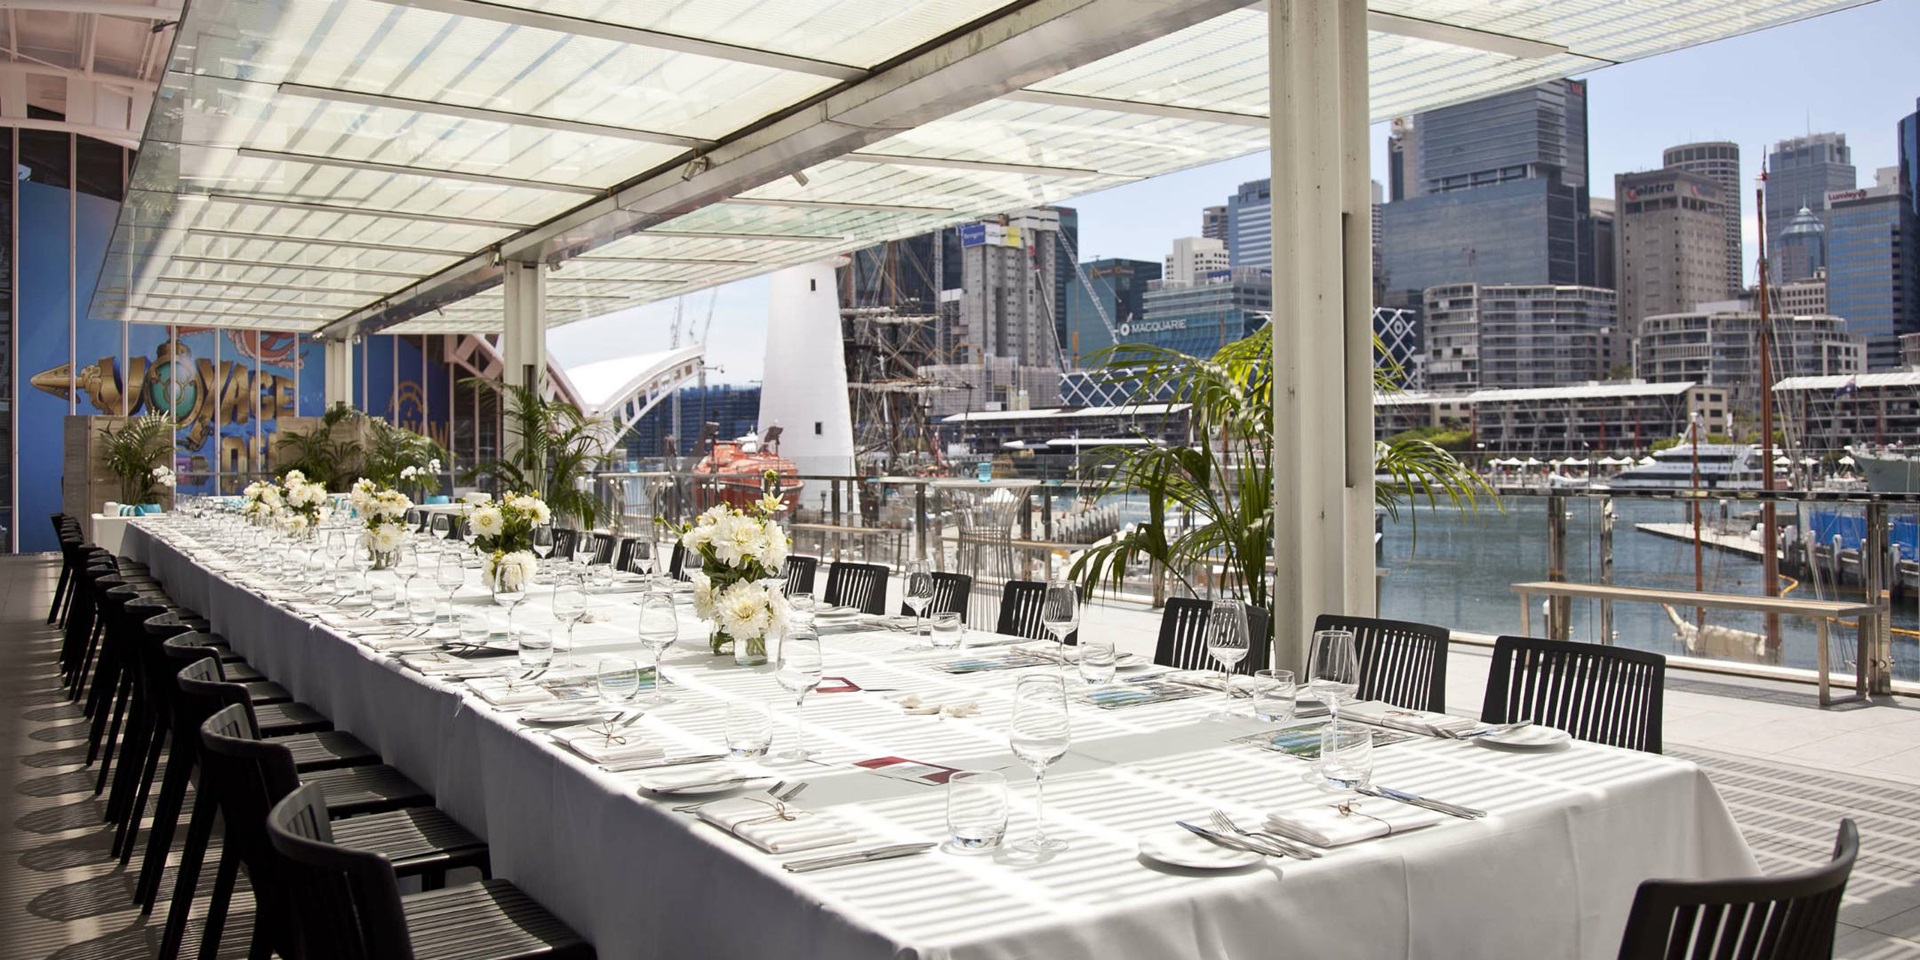 Ben Lexcen Terrace, perfect for your next banquet with a stunning view